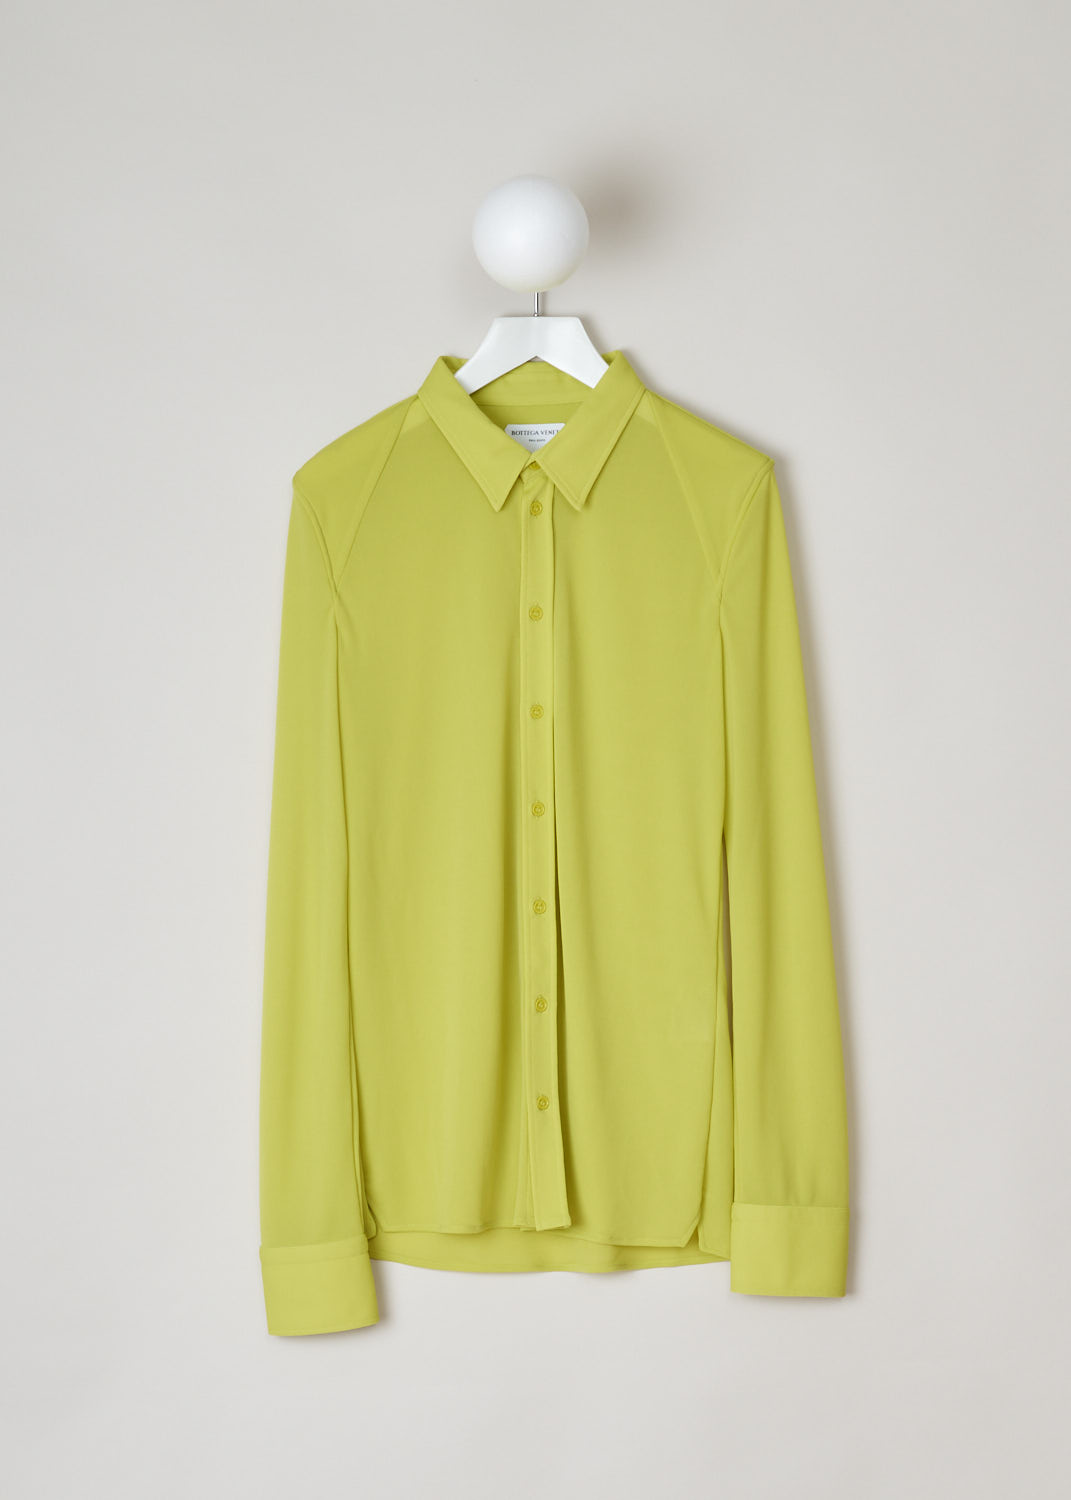 Bottega Veneta, See through yellow blouse, 636591_V0210_7275, yellow, front, Designed with a oversized fit in mind. Featuring a pointed collar, long cuffed sleeves with three buttons on them. And a straight hem with two short splits on the side seam. Keep in mind that the fabric is slightly see through.